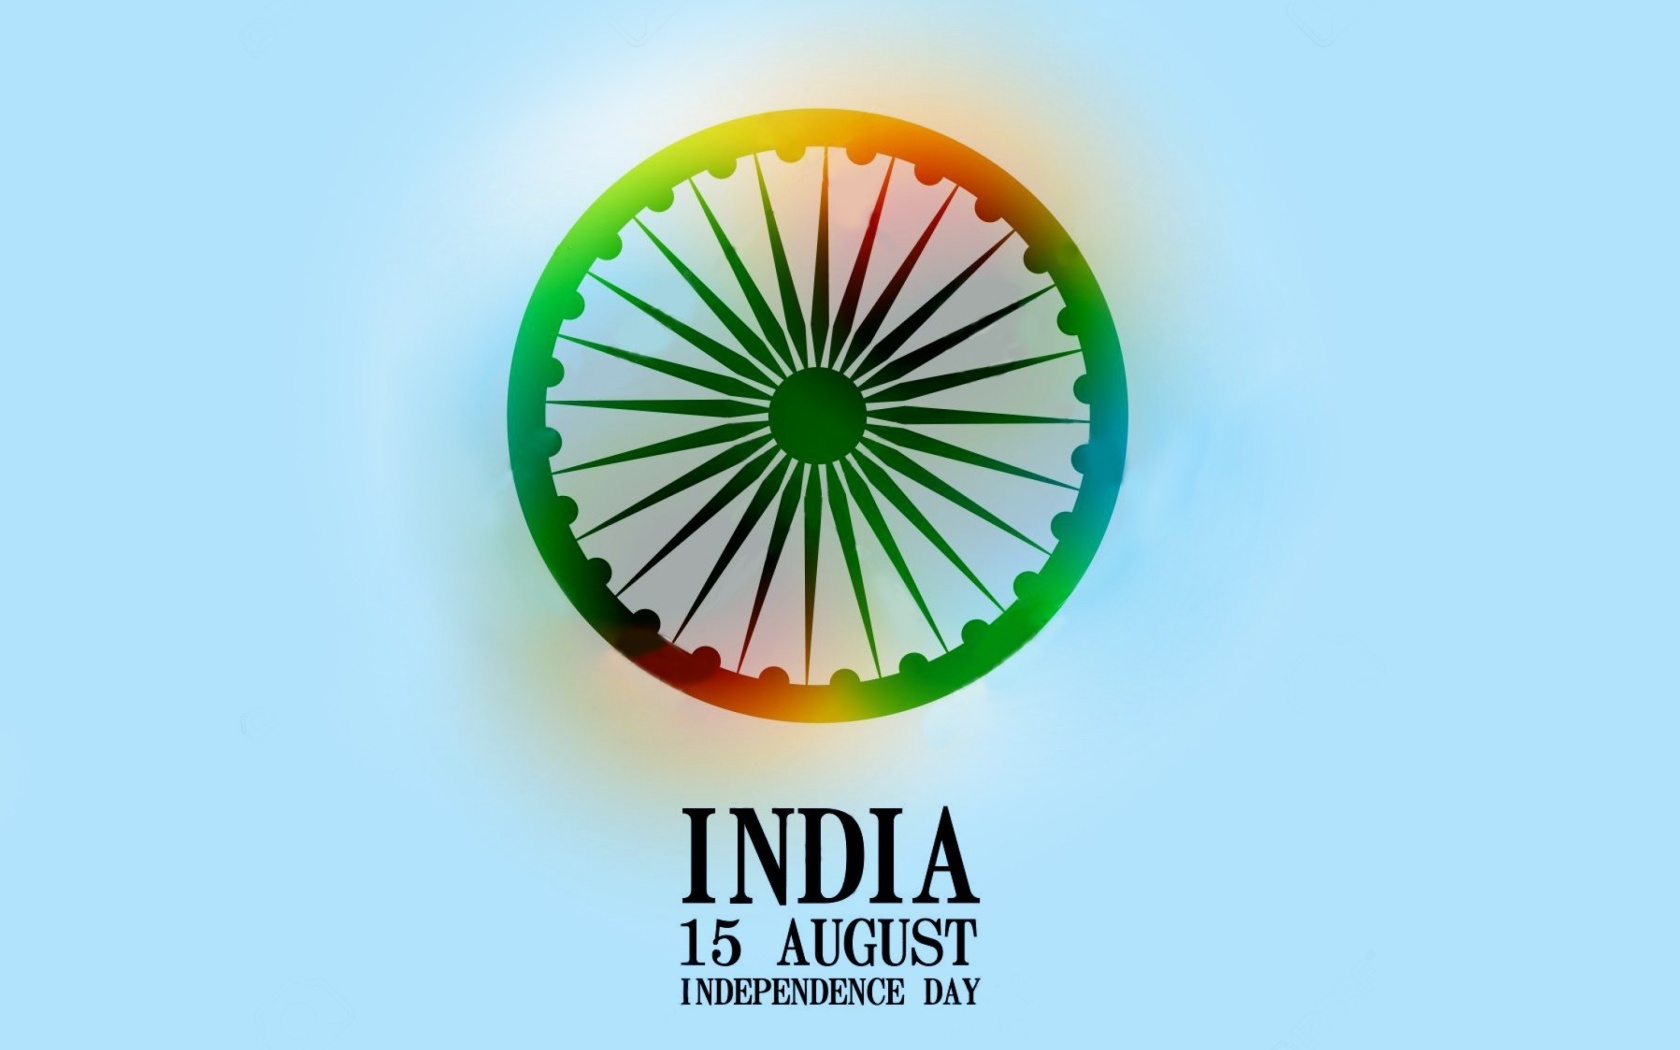 India Independence Day 15 August wallpaper 1680x1050